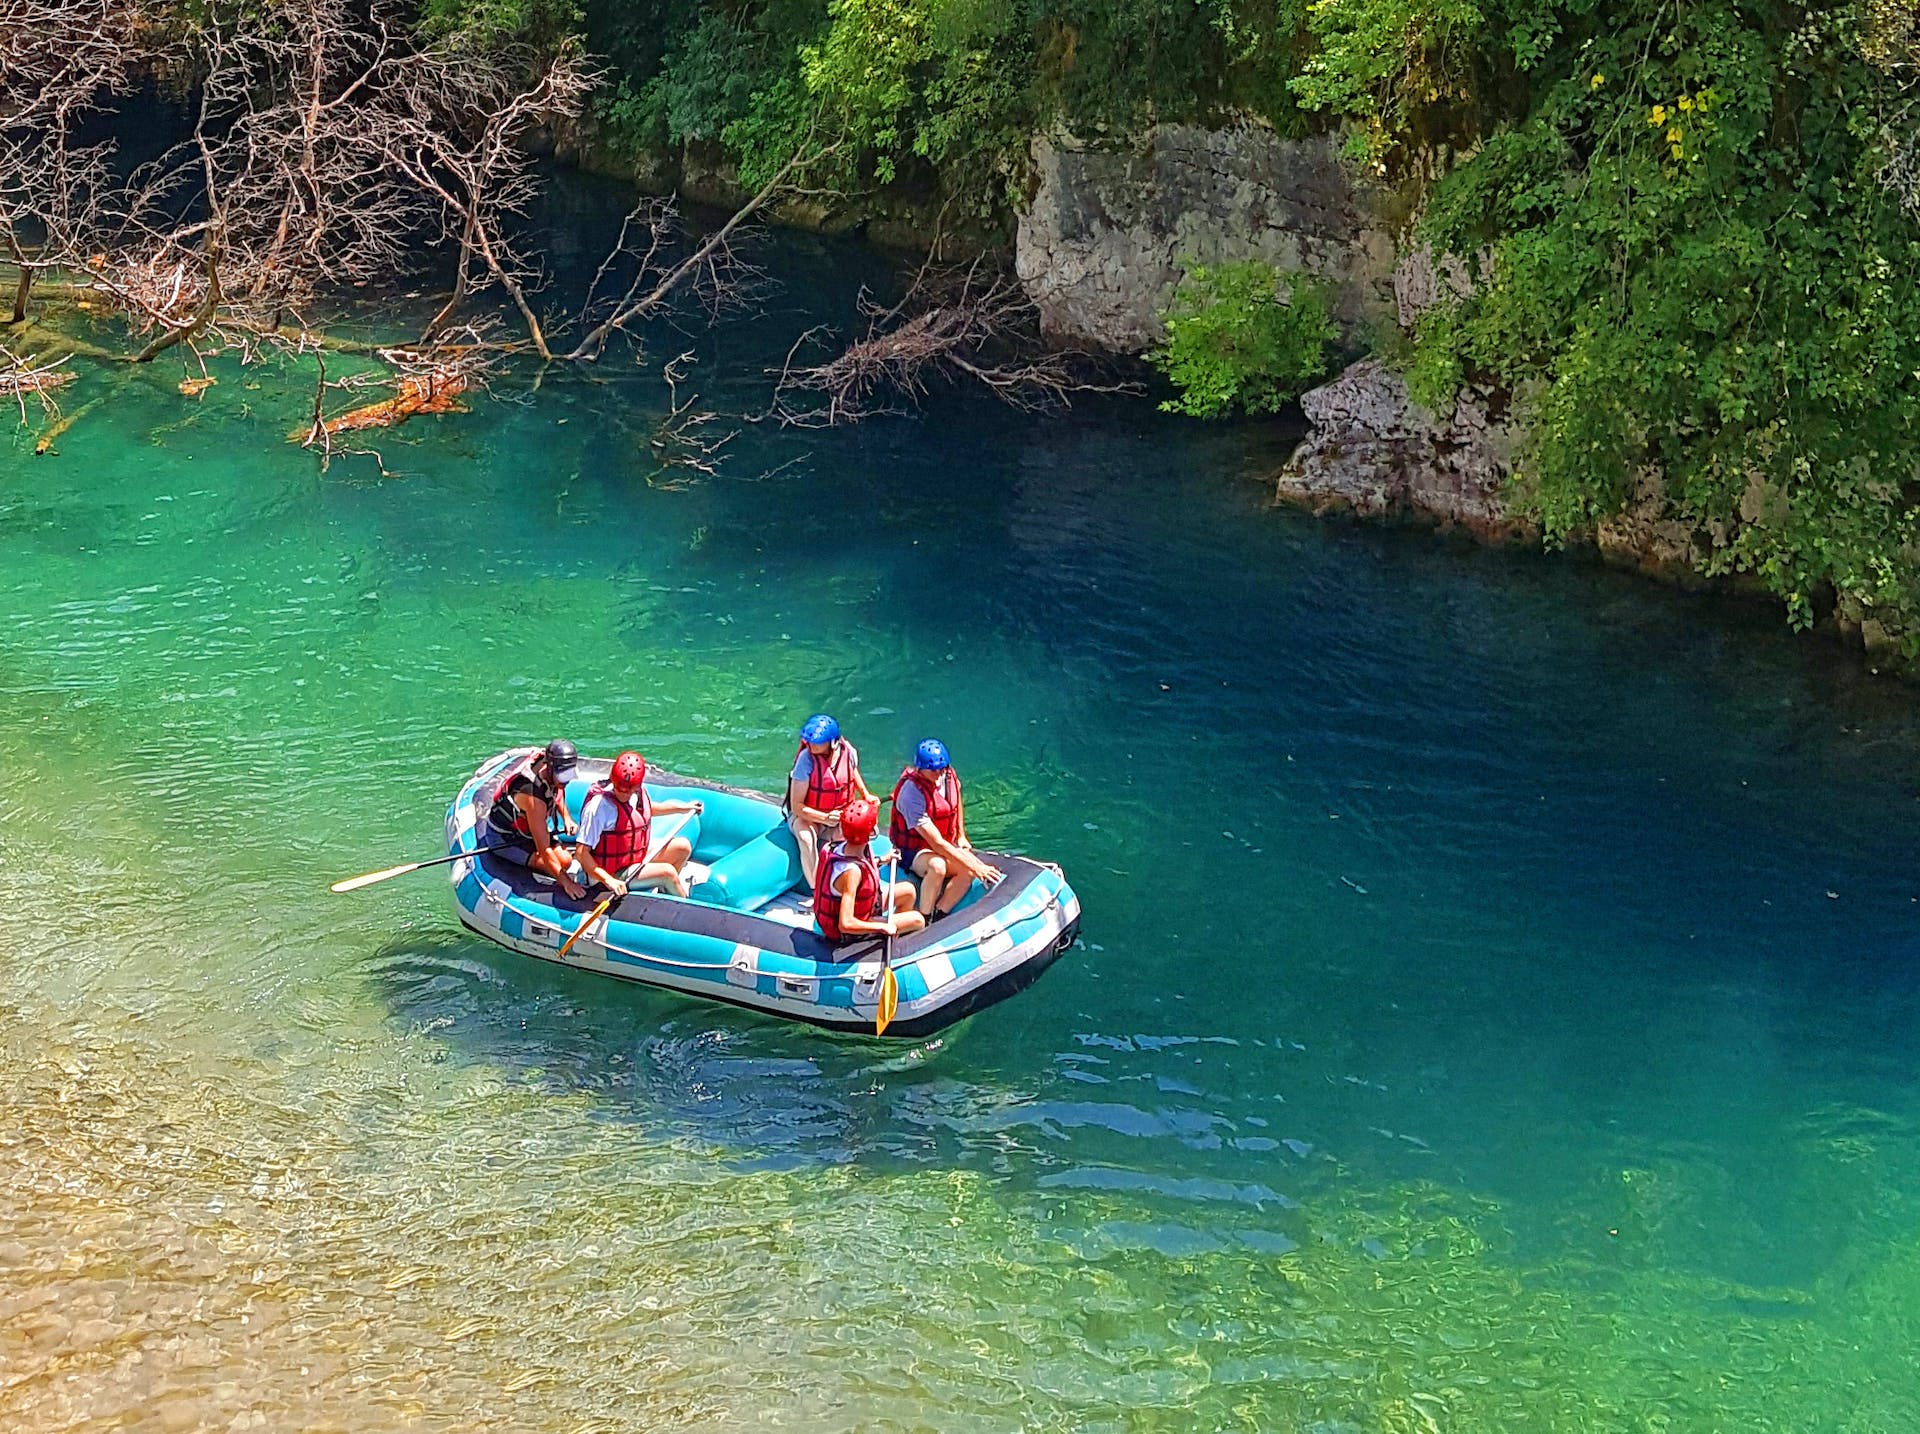 Rafting the clear waters of the Voidomatis River, in northern Greece. Photo: Getty.